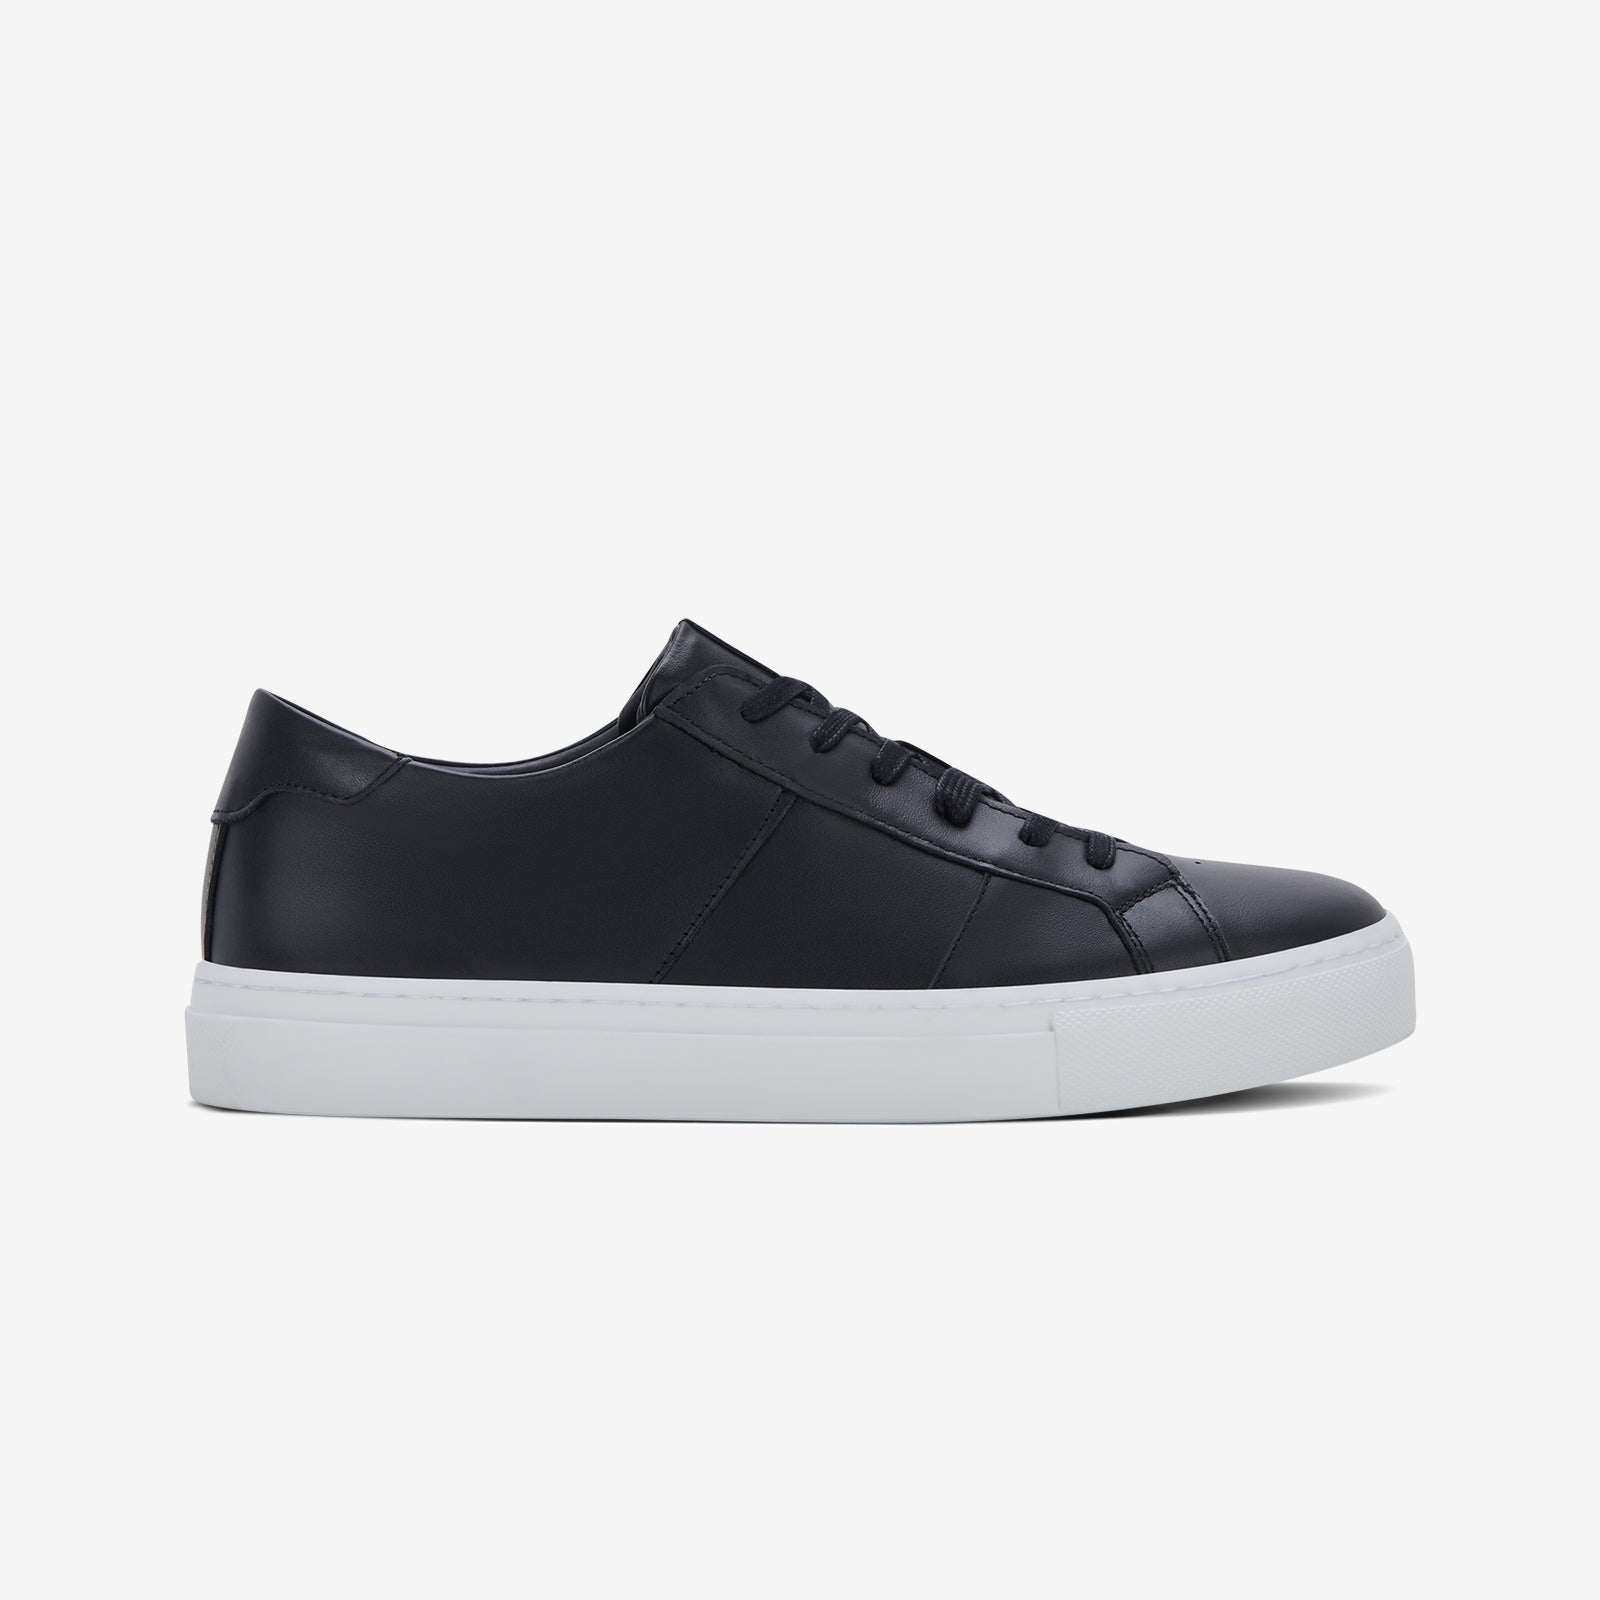 Greats Wooster Men's Shoes Blanco : 11.5 M